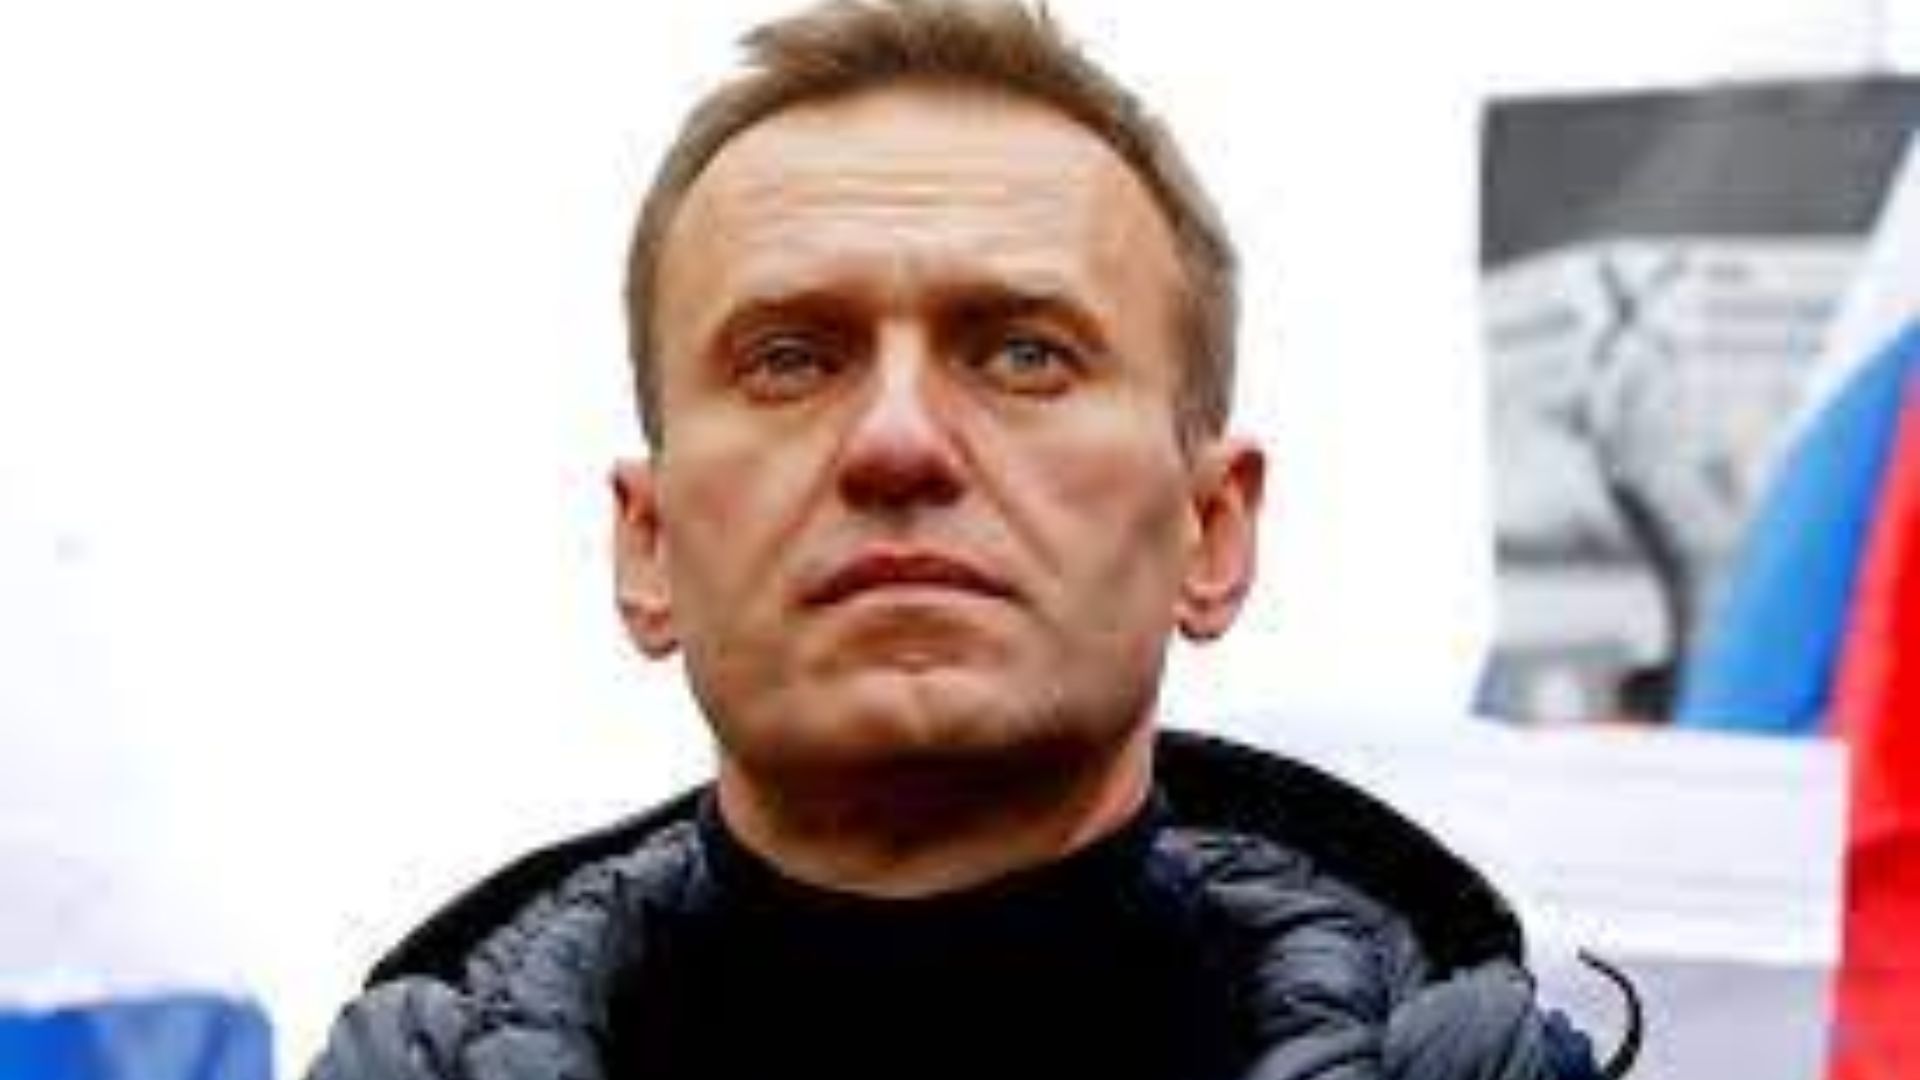 Russian Opposition Leader Alexei Navalny passes away in prison